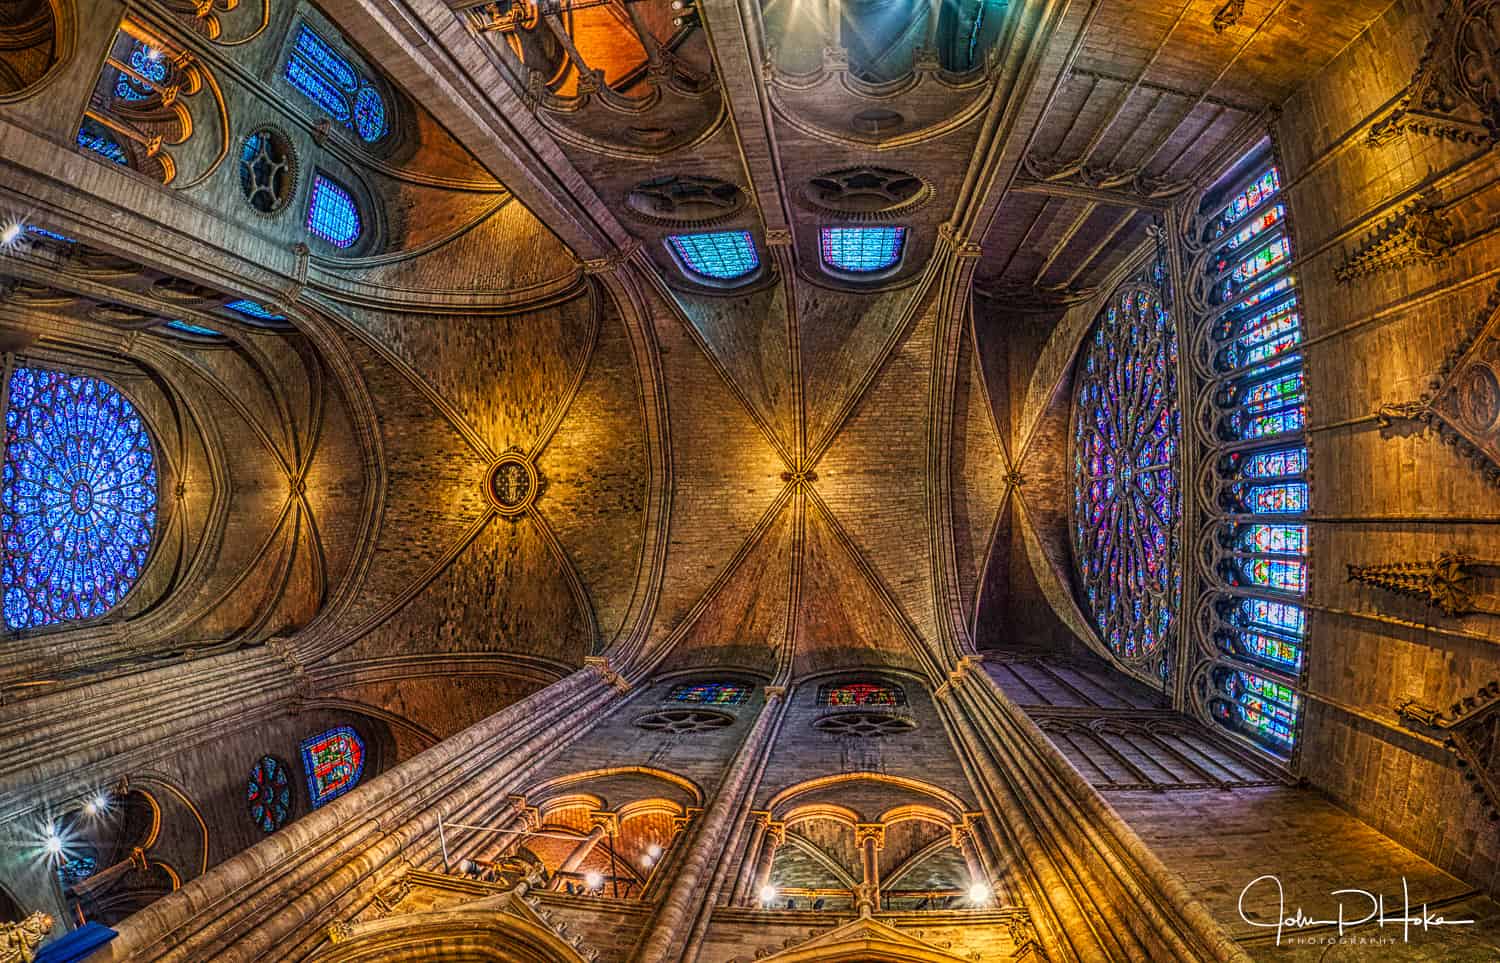 HDR Image of the Notre Dame Cathedral ceiling before the fire that destroyed the building. Paris, France